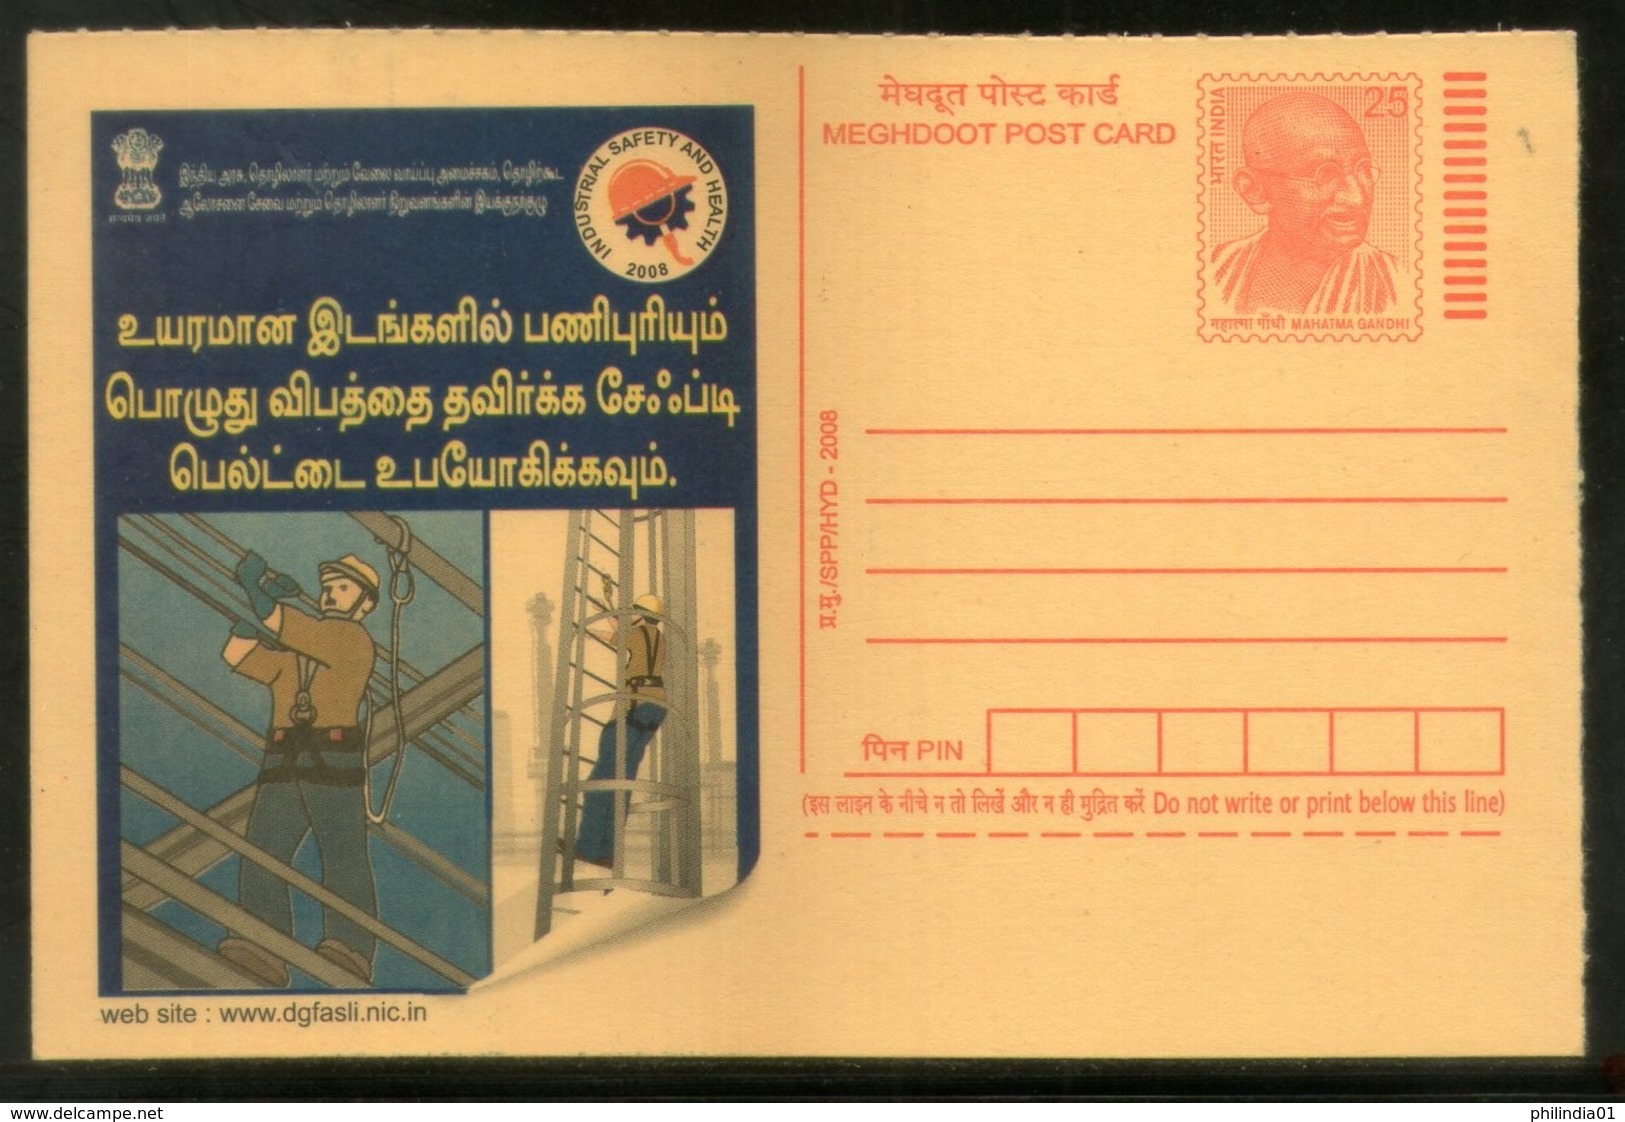 India 2008 "Use Safety Belts On High" Industrial Safety & Health Job Tamil Advert Gandhi Post Card # 504 - Accidents & Road Safety